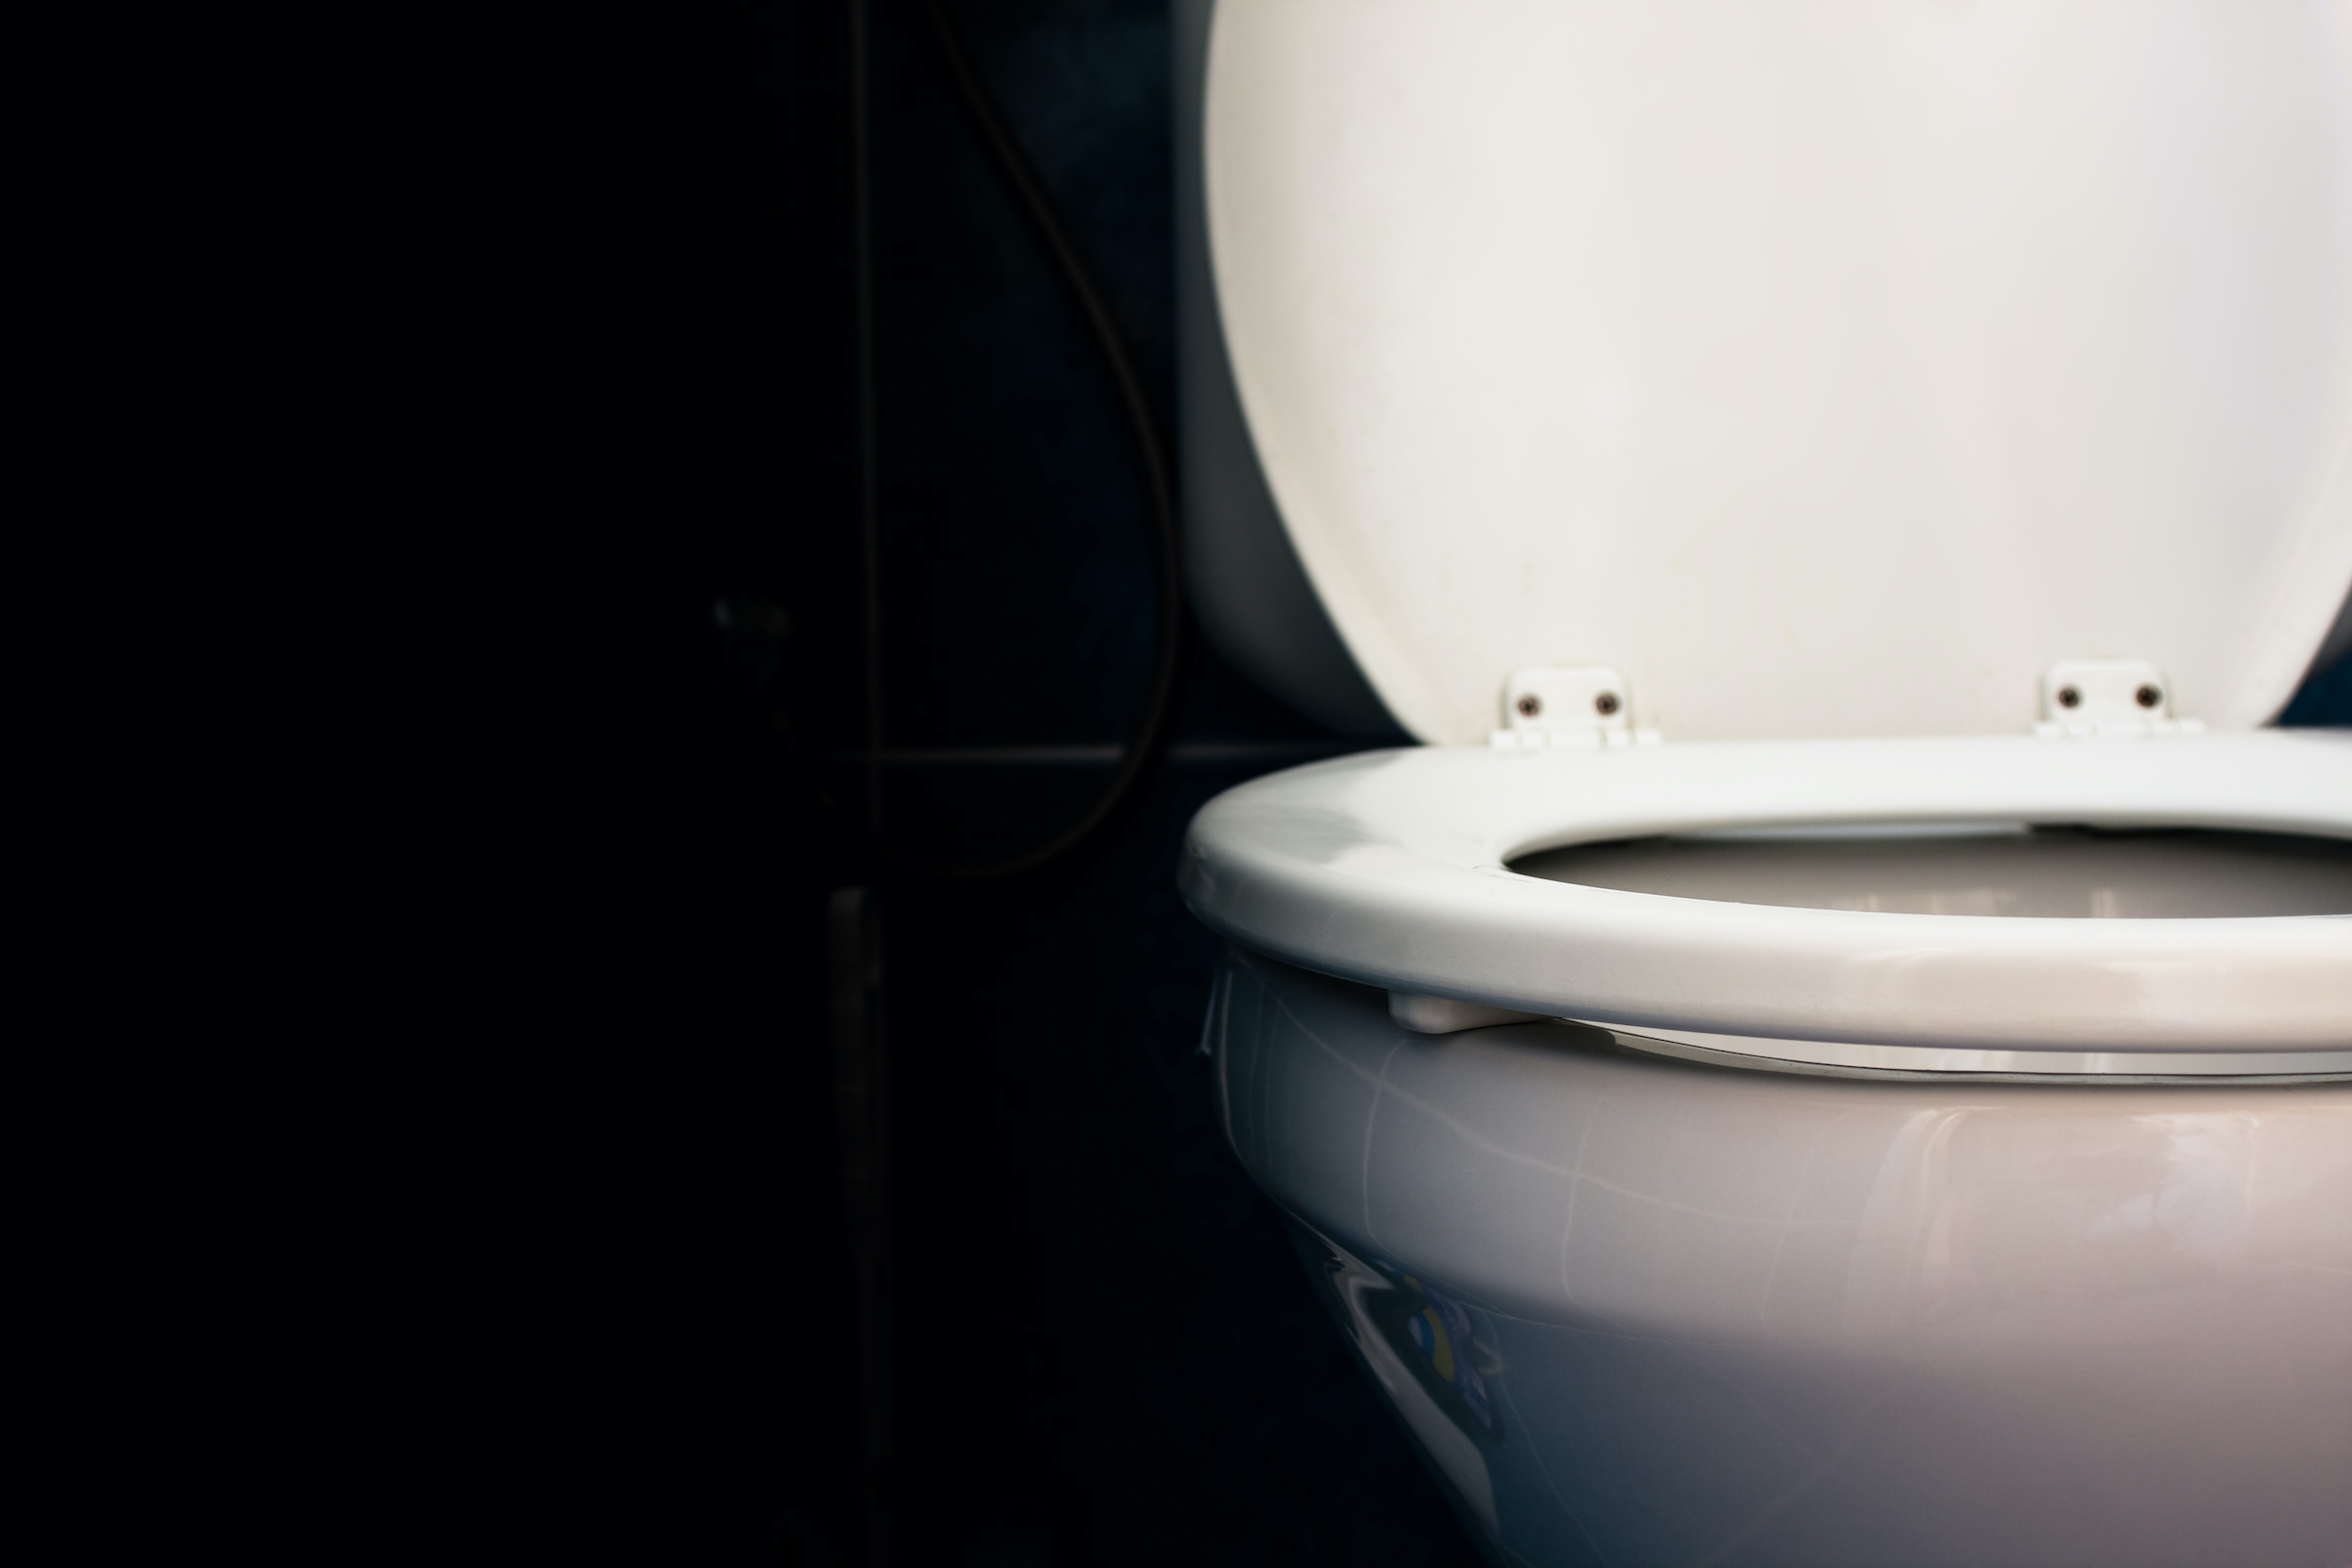 Can You Get HIV From a Toilet Seat?